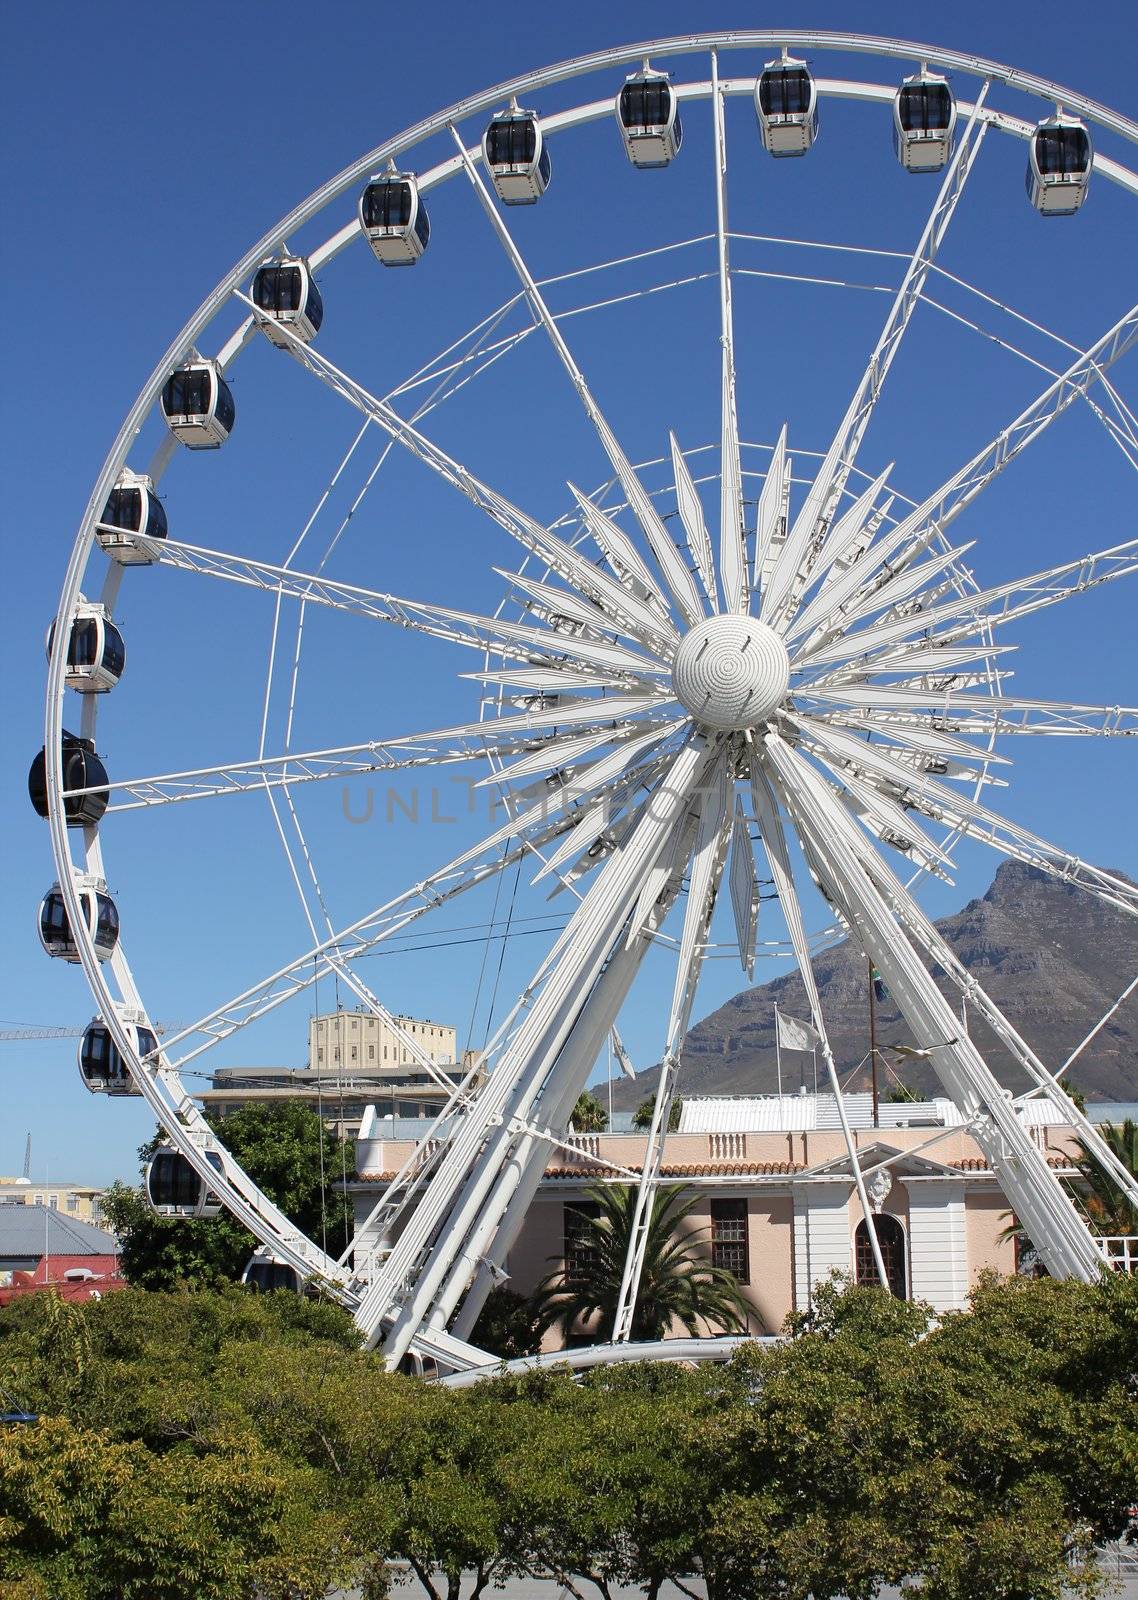 Ferris Wheel in front of blue sky at V&A Waterfront in Cape Town, South Africa